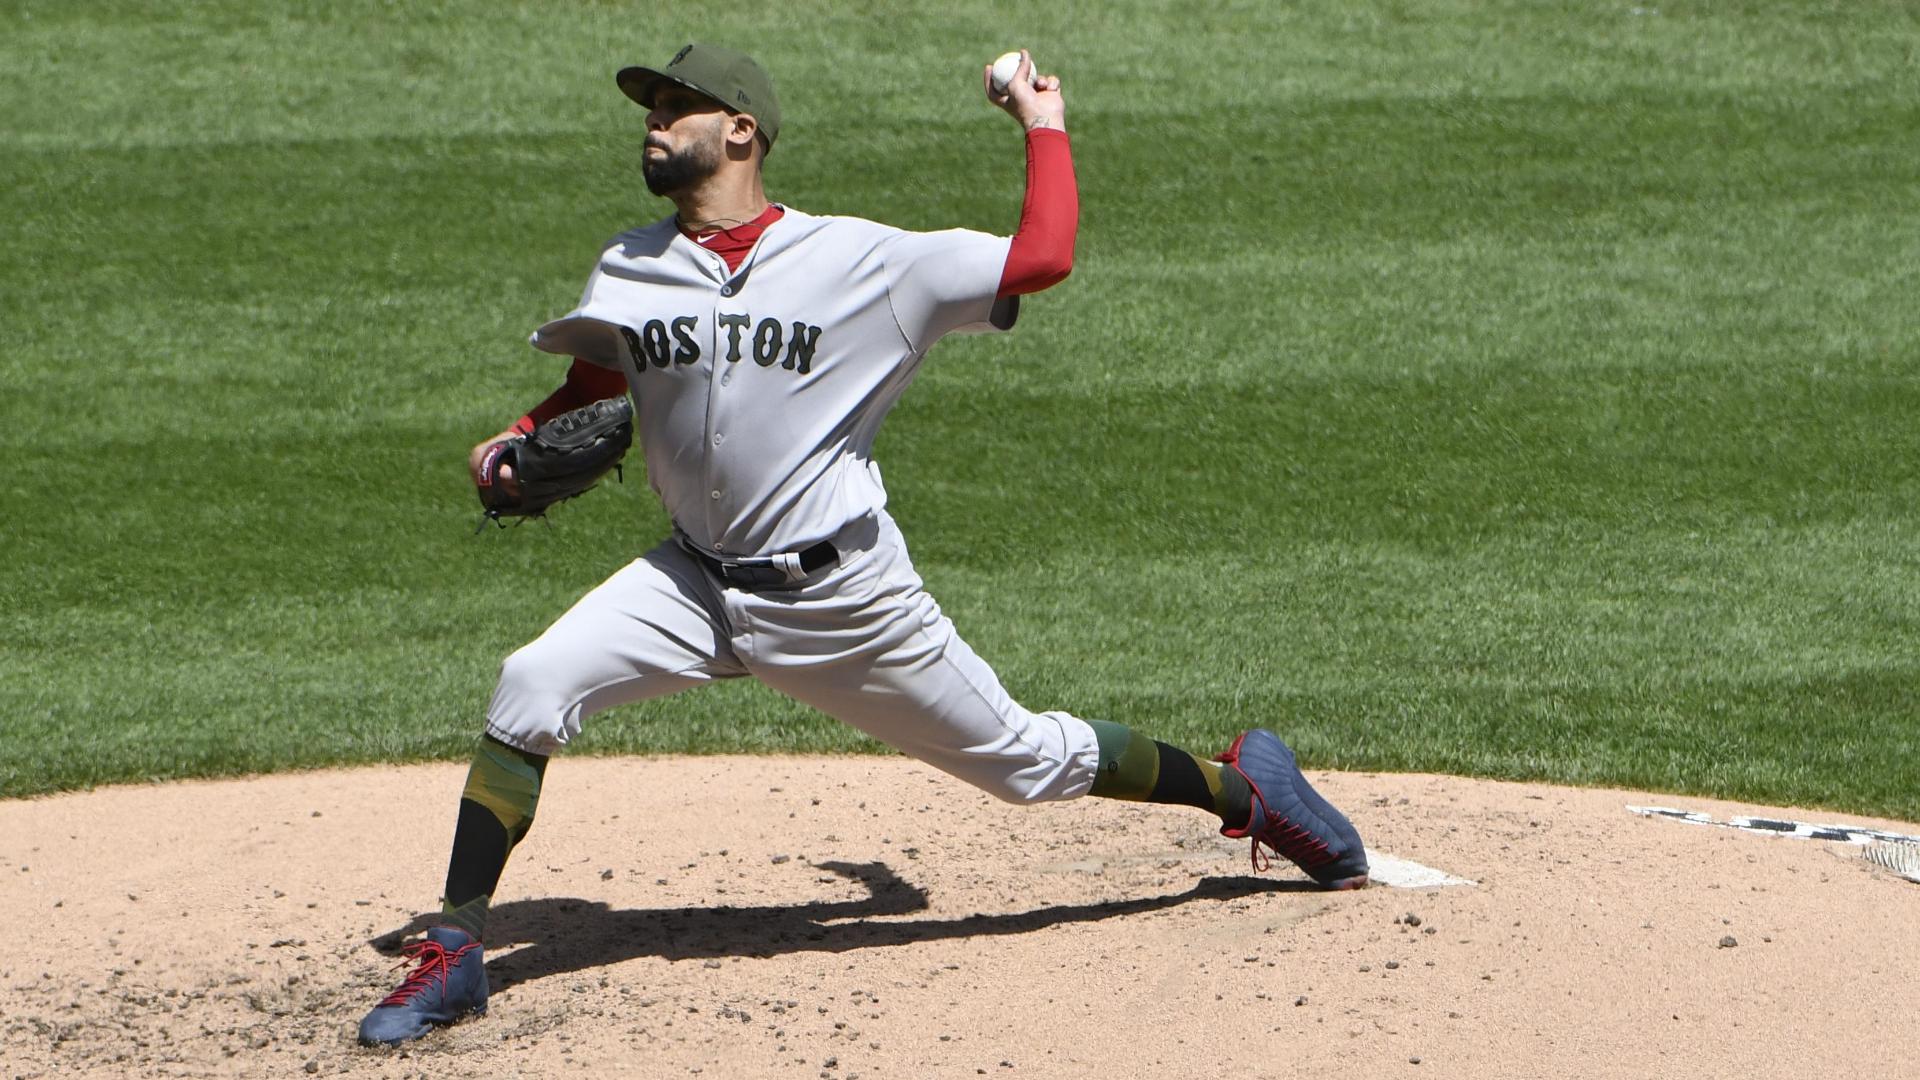 Price uneven in season debut, White Sox get past Red Sox 54 ABC7 Chicago